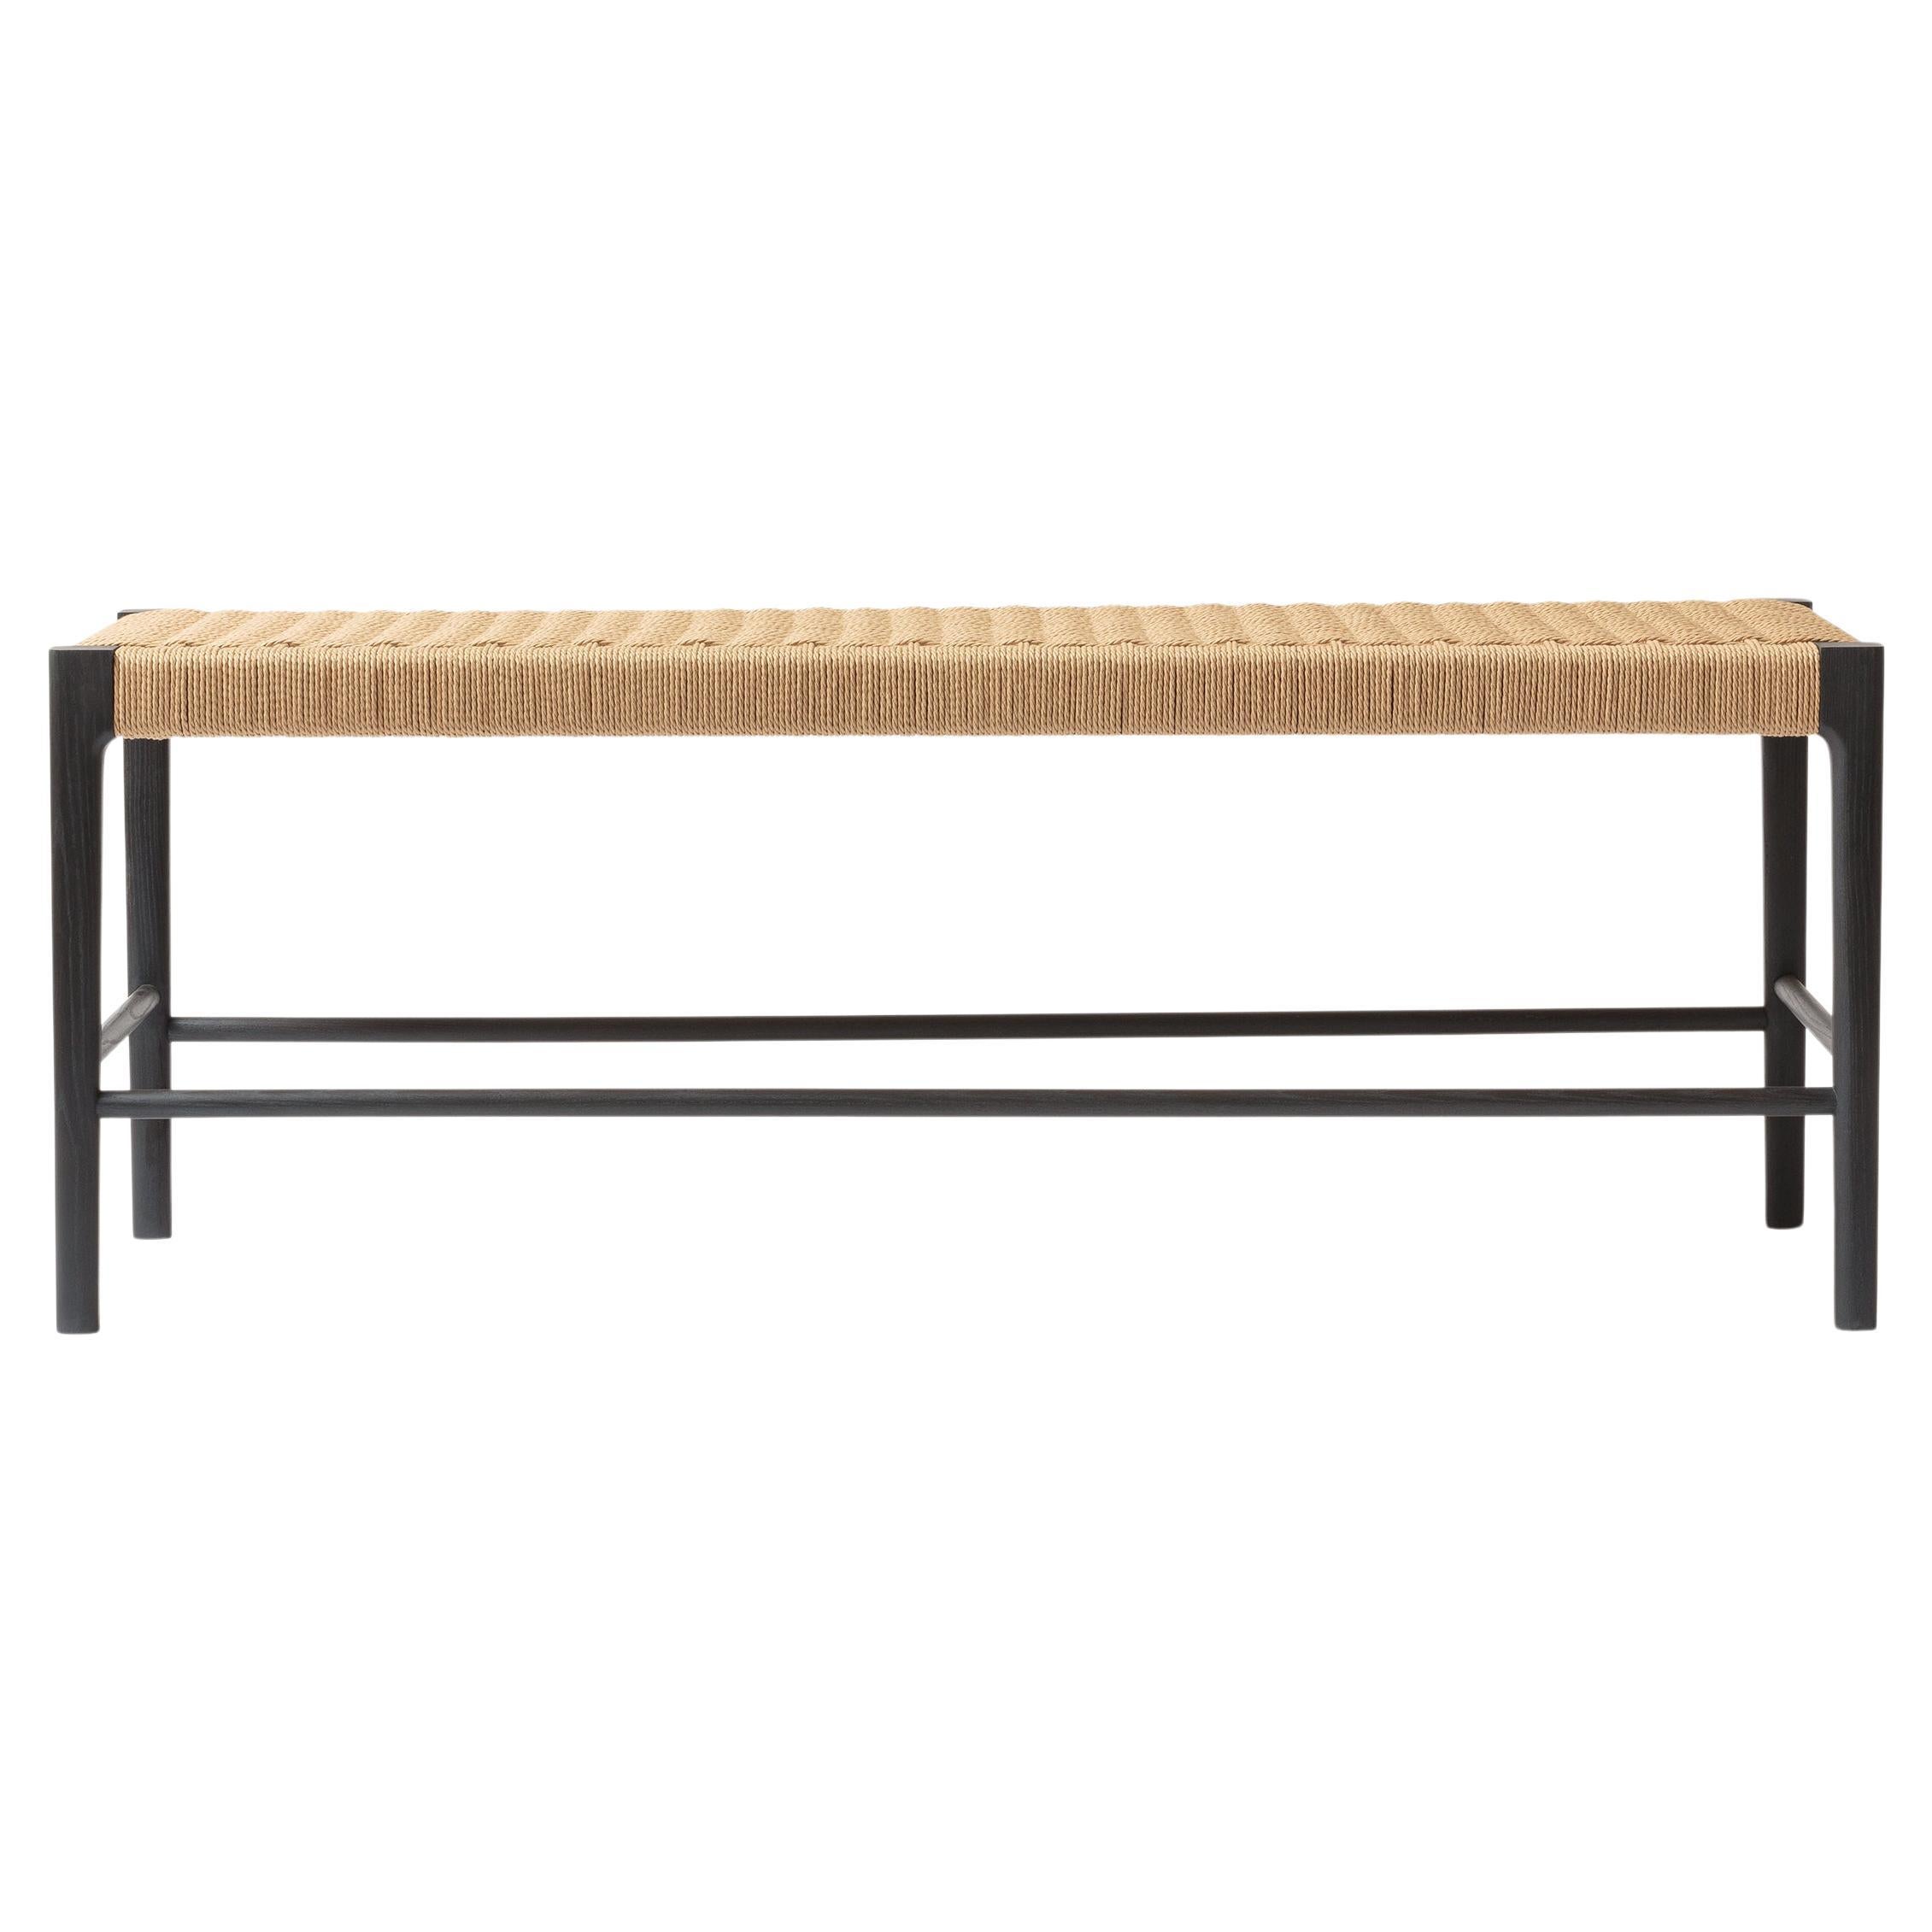 Papyri Bench, Occasional Woven Bench in Blackened Ash and Natural Danish Cord